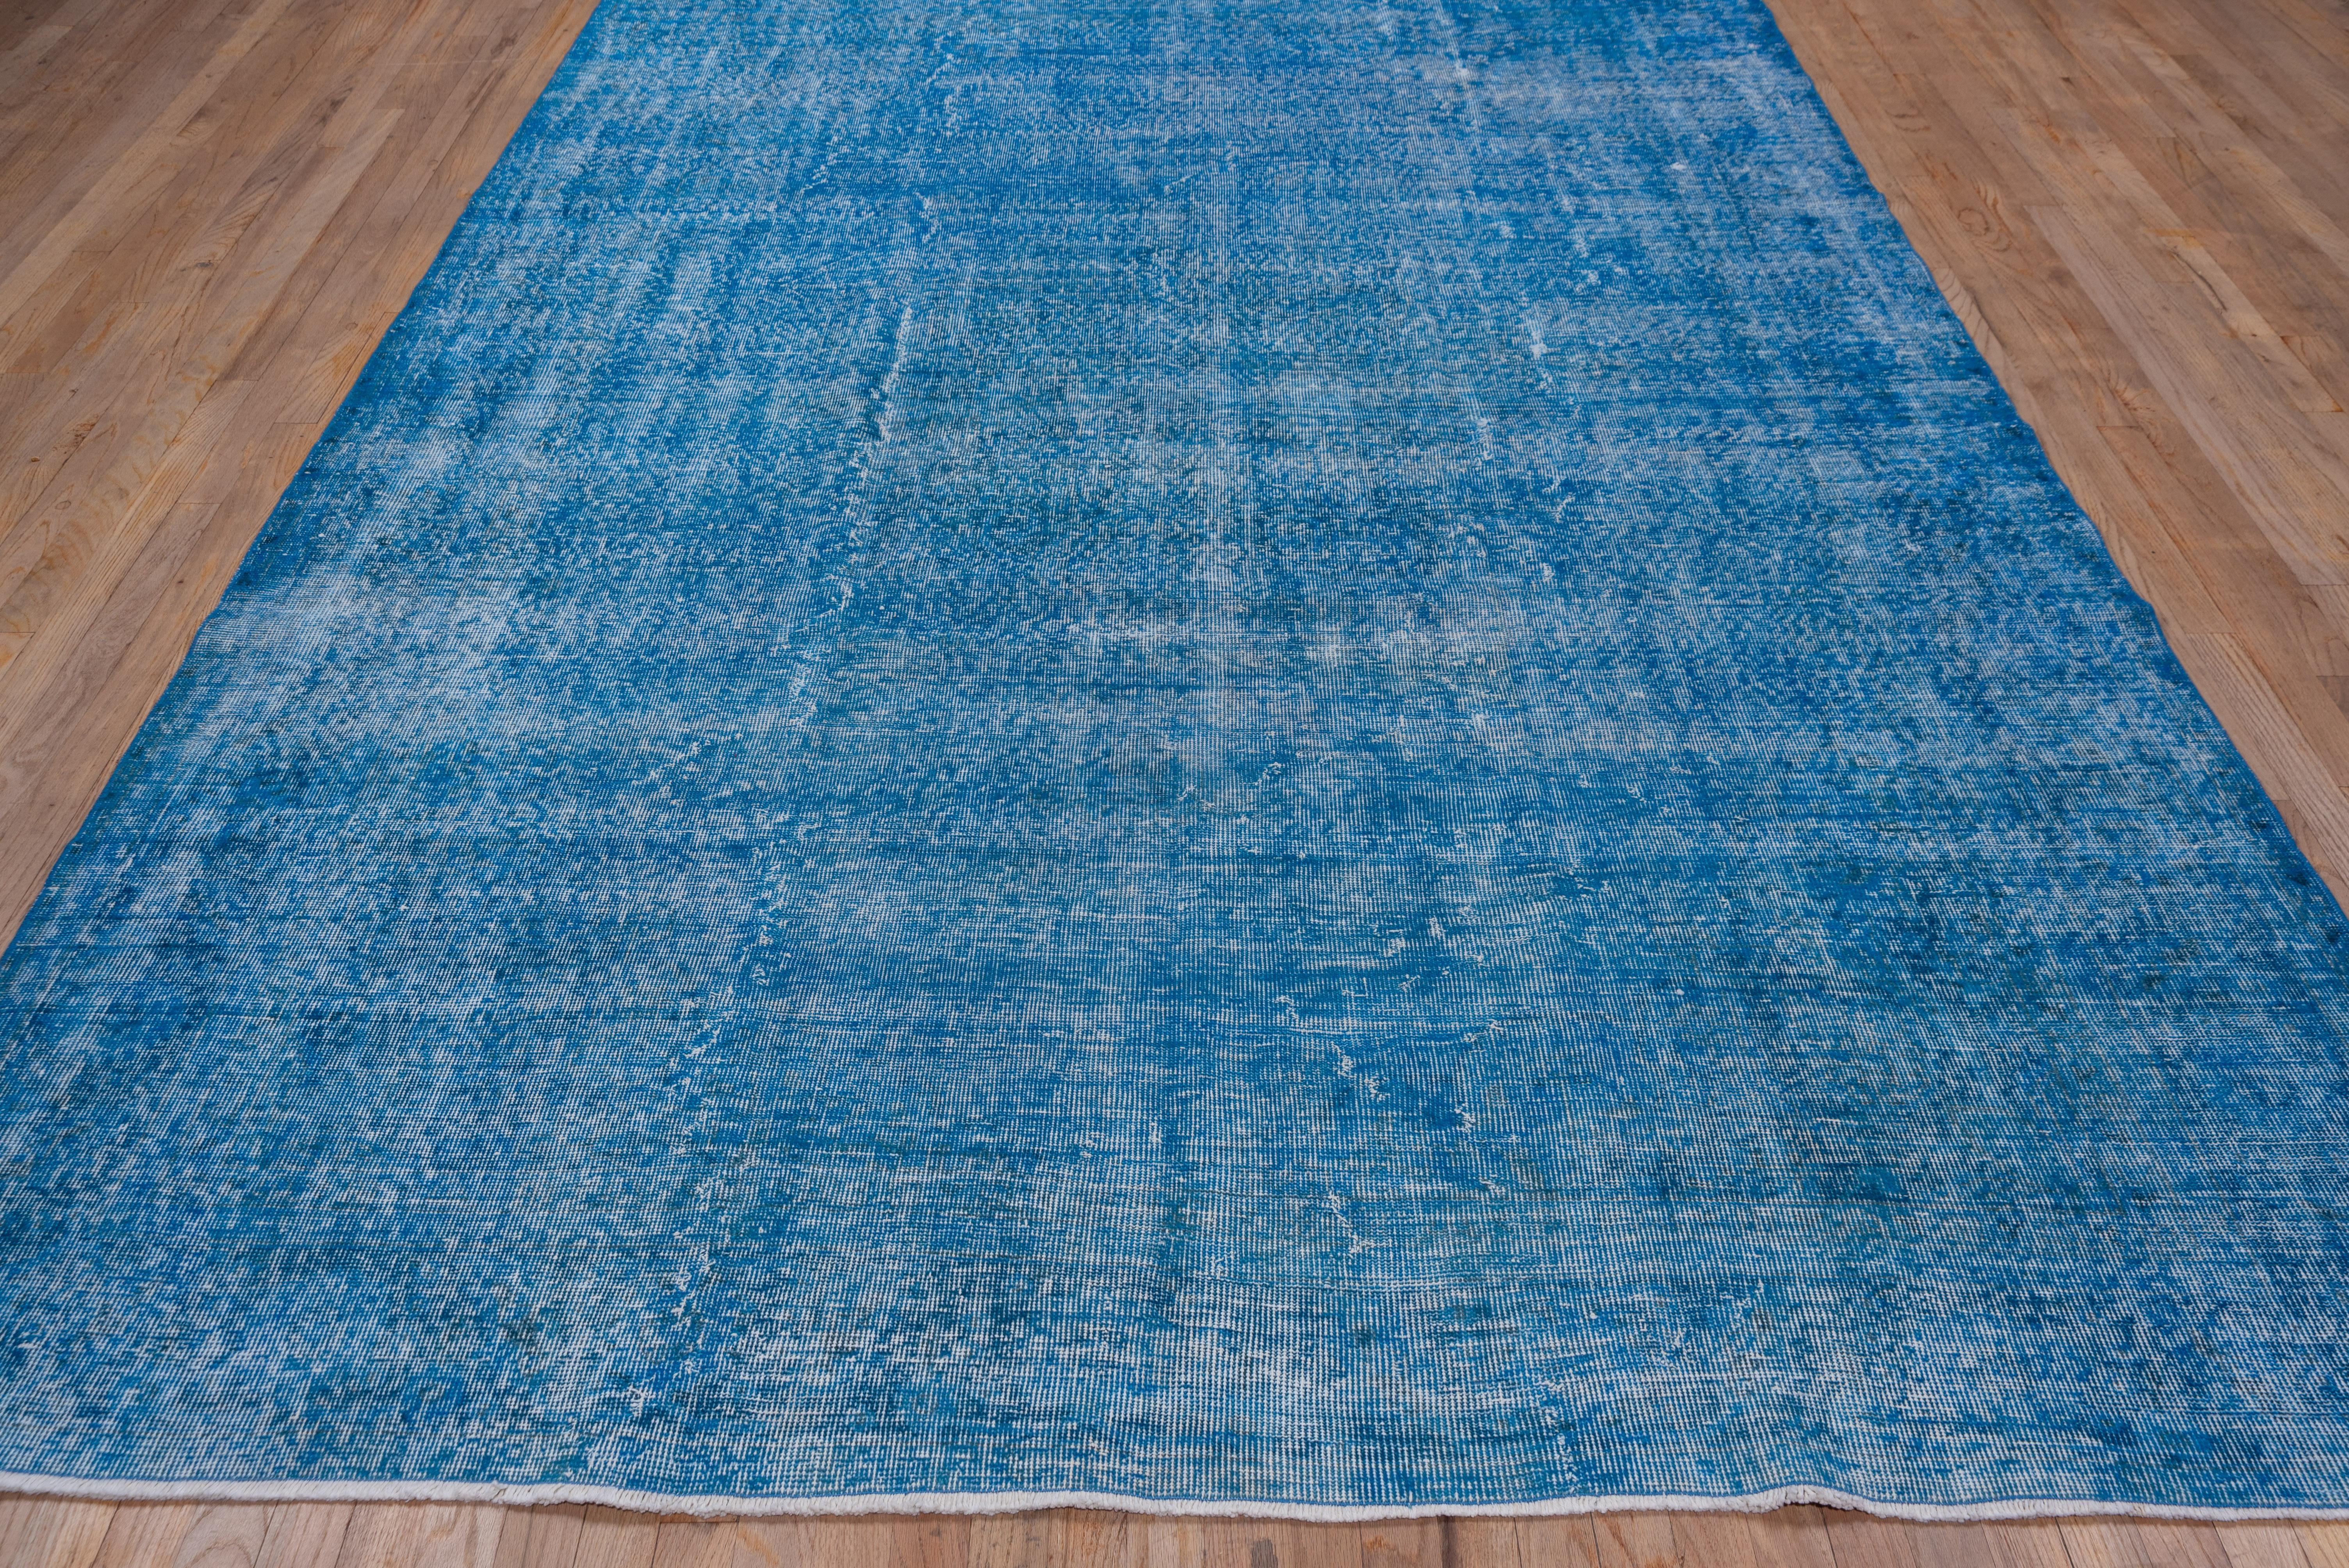 This blue Turkish overdyed Sparta carpet has a pattern defined by the wear beyond the all-over general distress. Vertical and horizontal off white strips cross near the center. Shabby chic conditions and can offer some great texture for floor